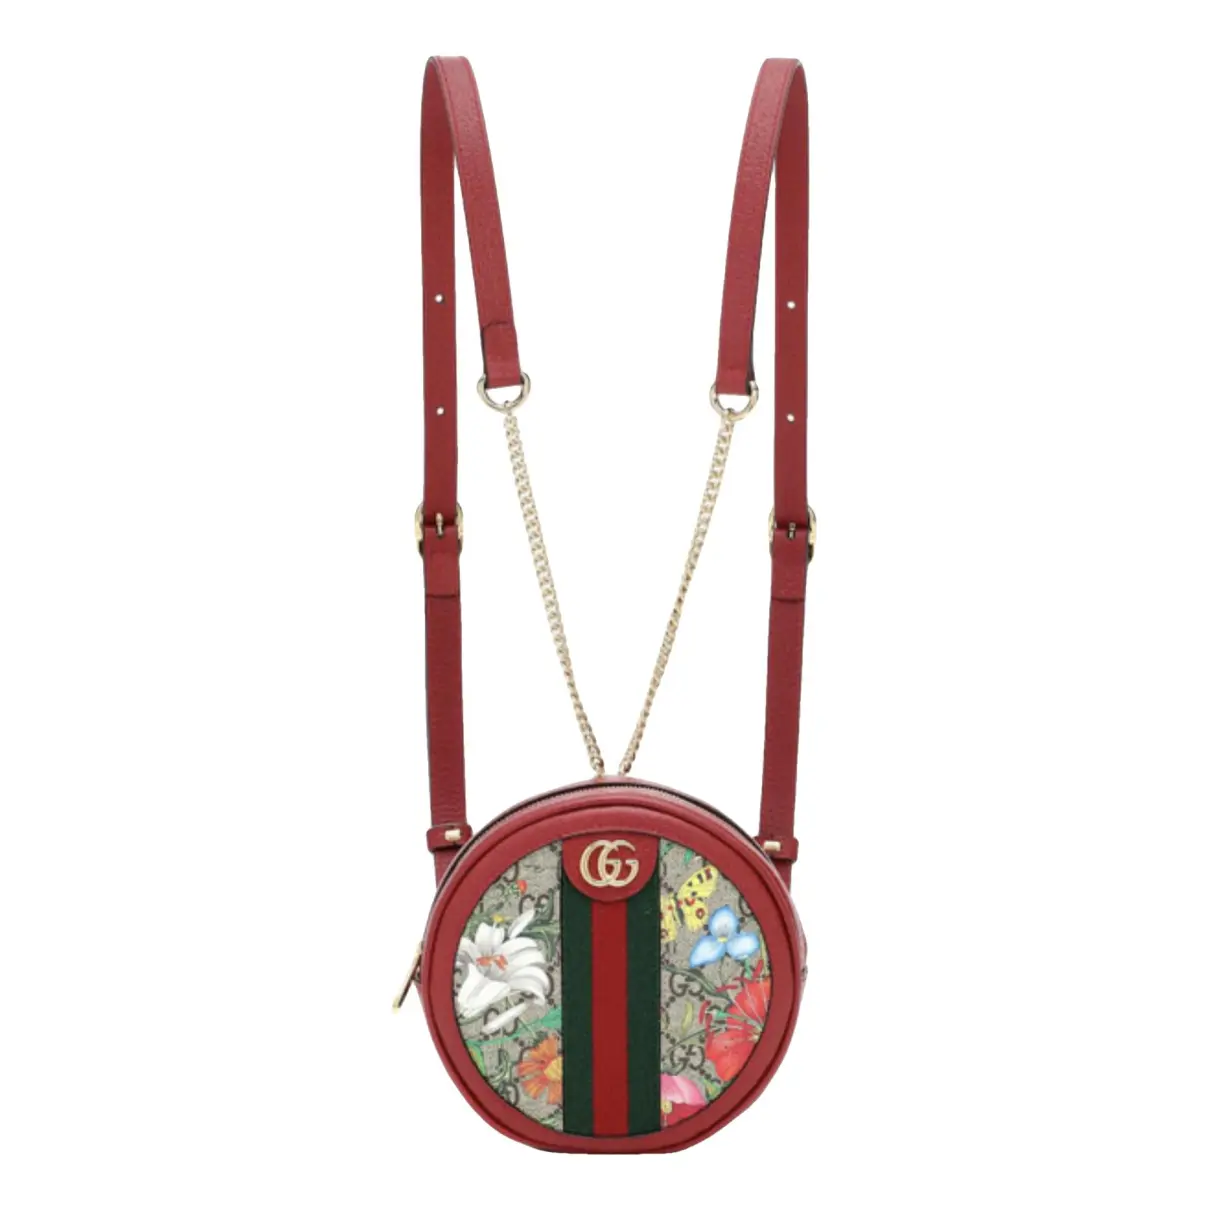 Ophidia Round leather backpack Gucci